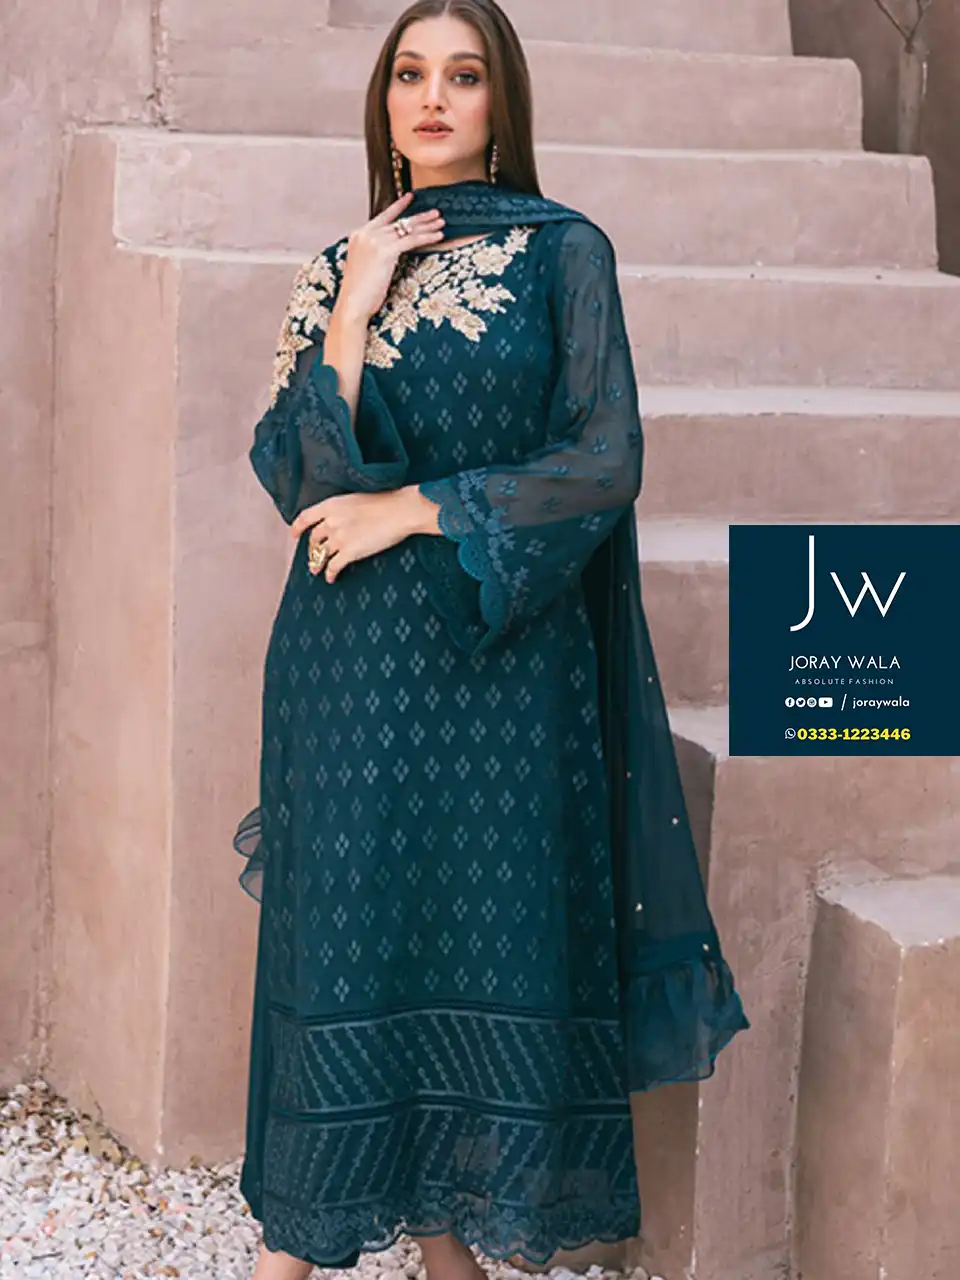 Partywear Formal festive collection Azure with free delivery available at joraywala